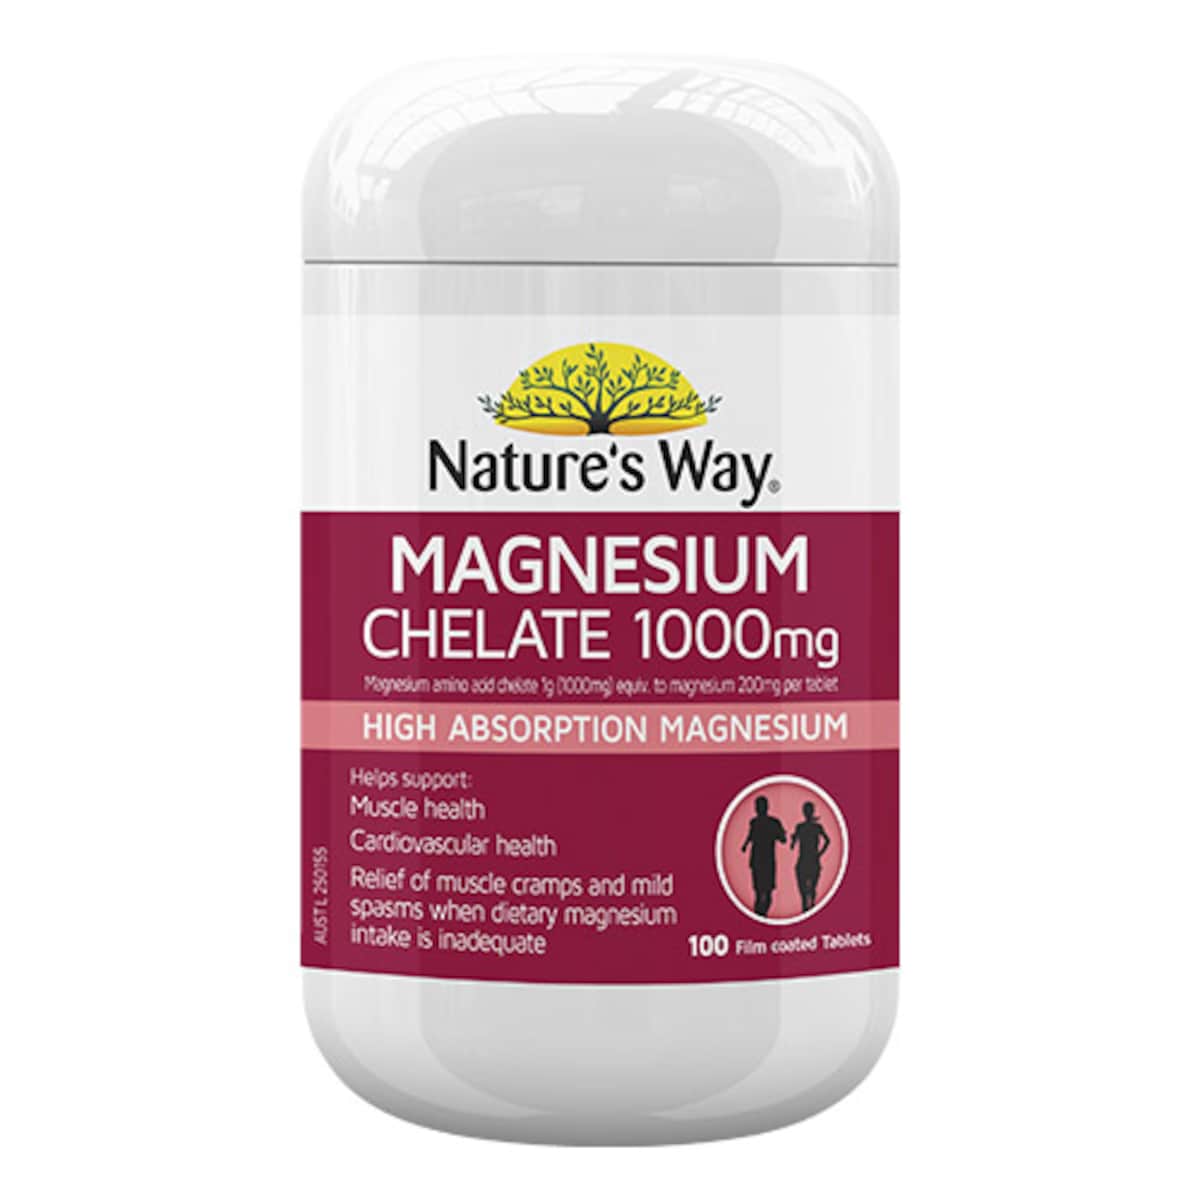 Natures Way Magnesium Chelate 1000mg 100 Tablets